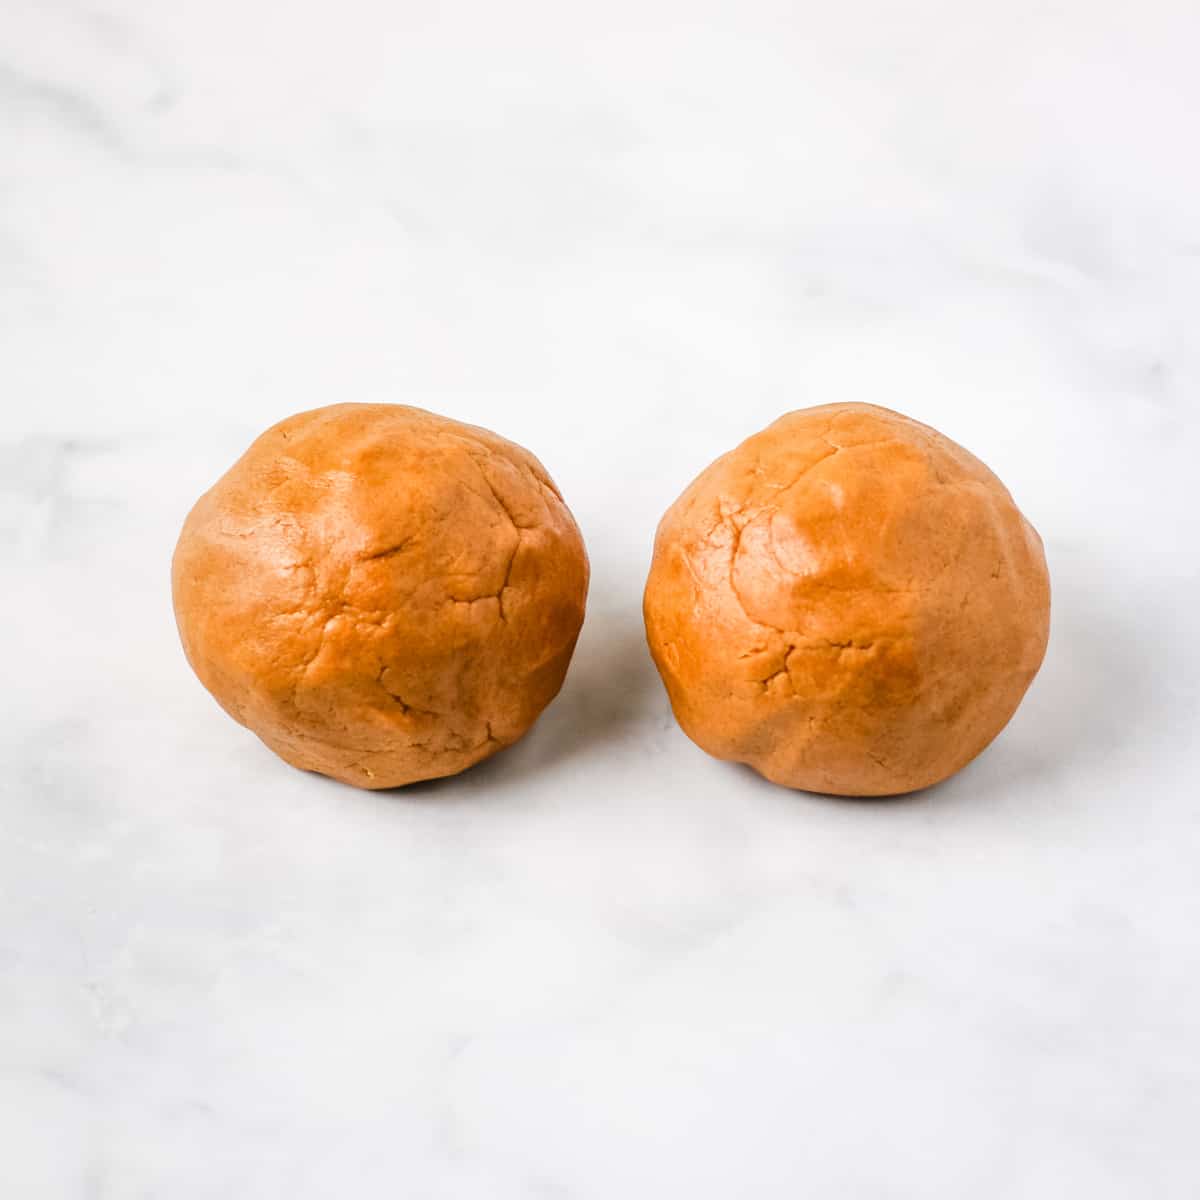 Two equal sized cookie dough balls on a marble countertop.